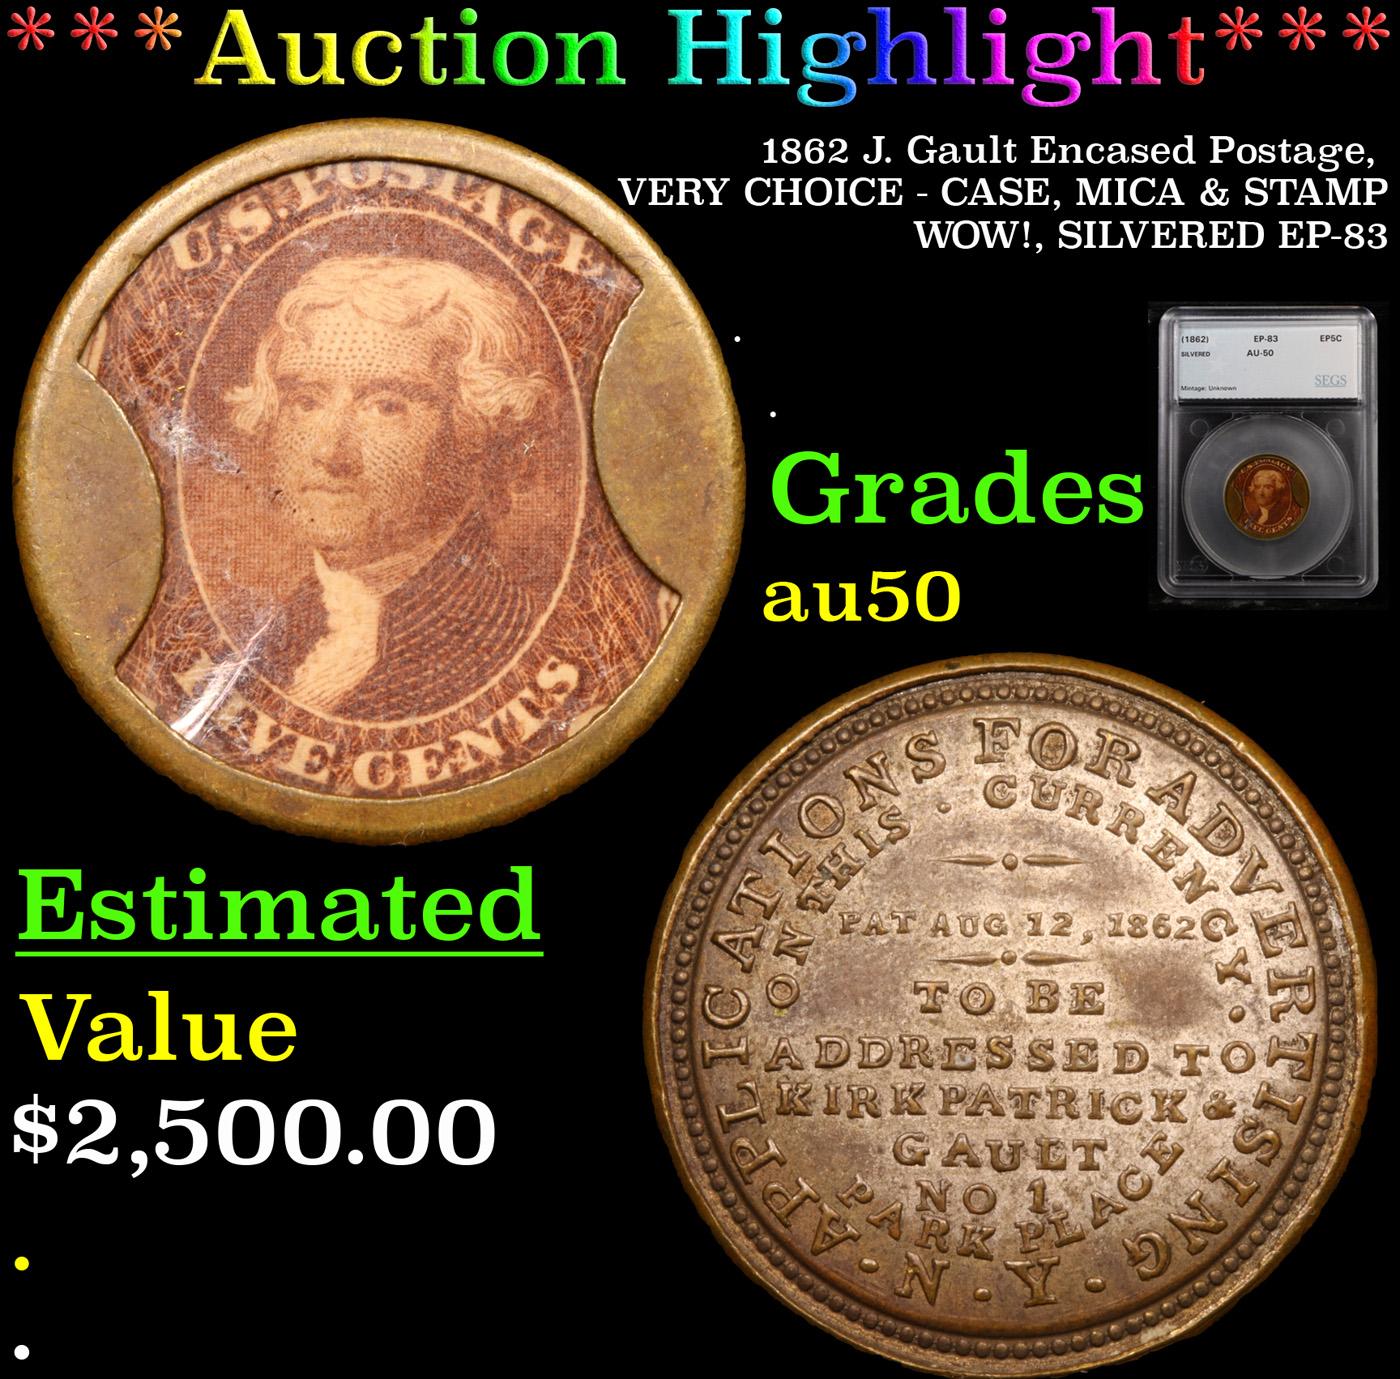 ***Auction Highlight*** 1862 J. Gault Encased Postage, VERY CHOICE - CASE, MICA & STAMP WOW!, SILVER